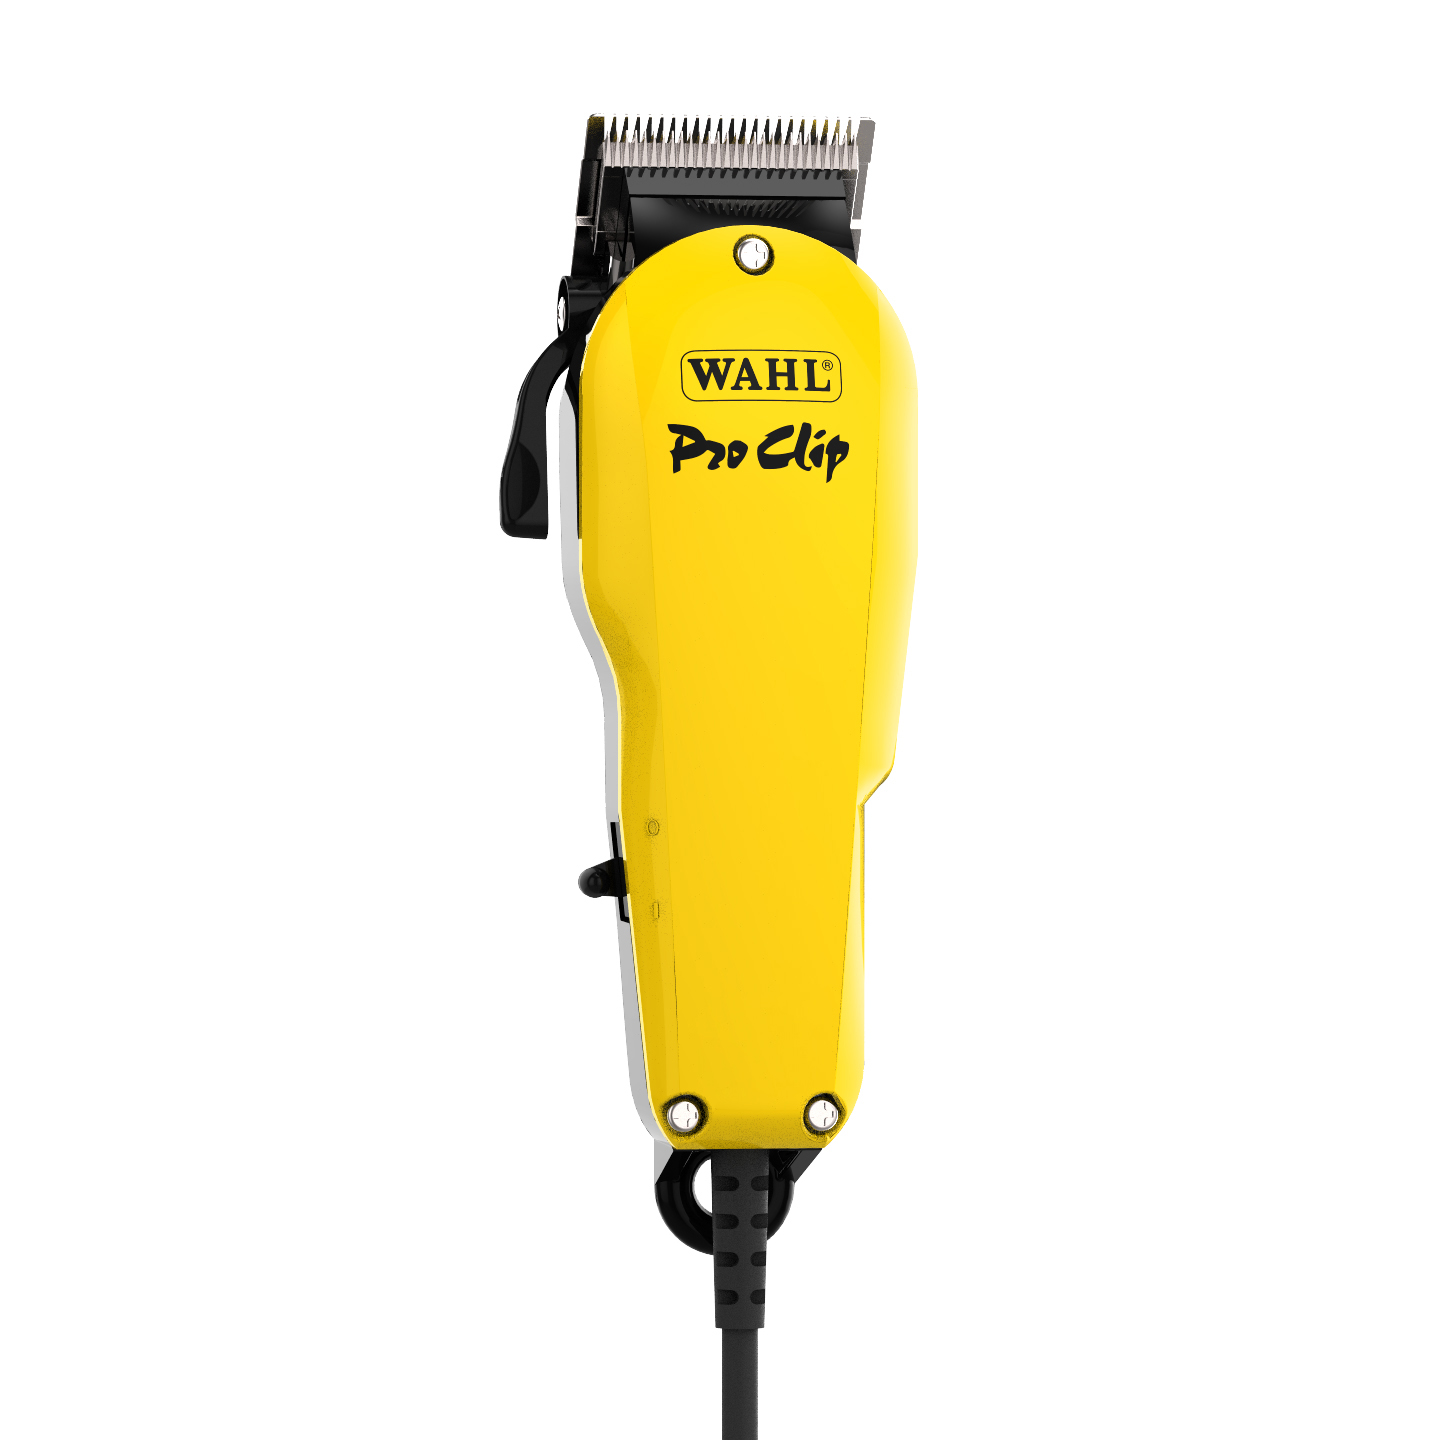 wahl 222206 900w hair trimmers yellow